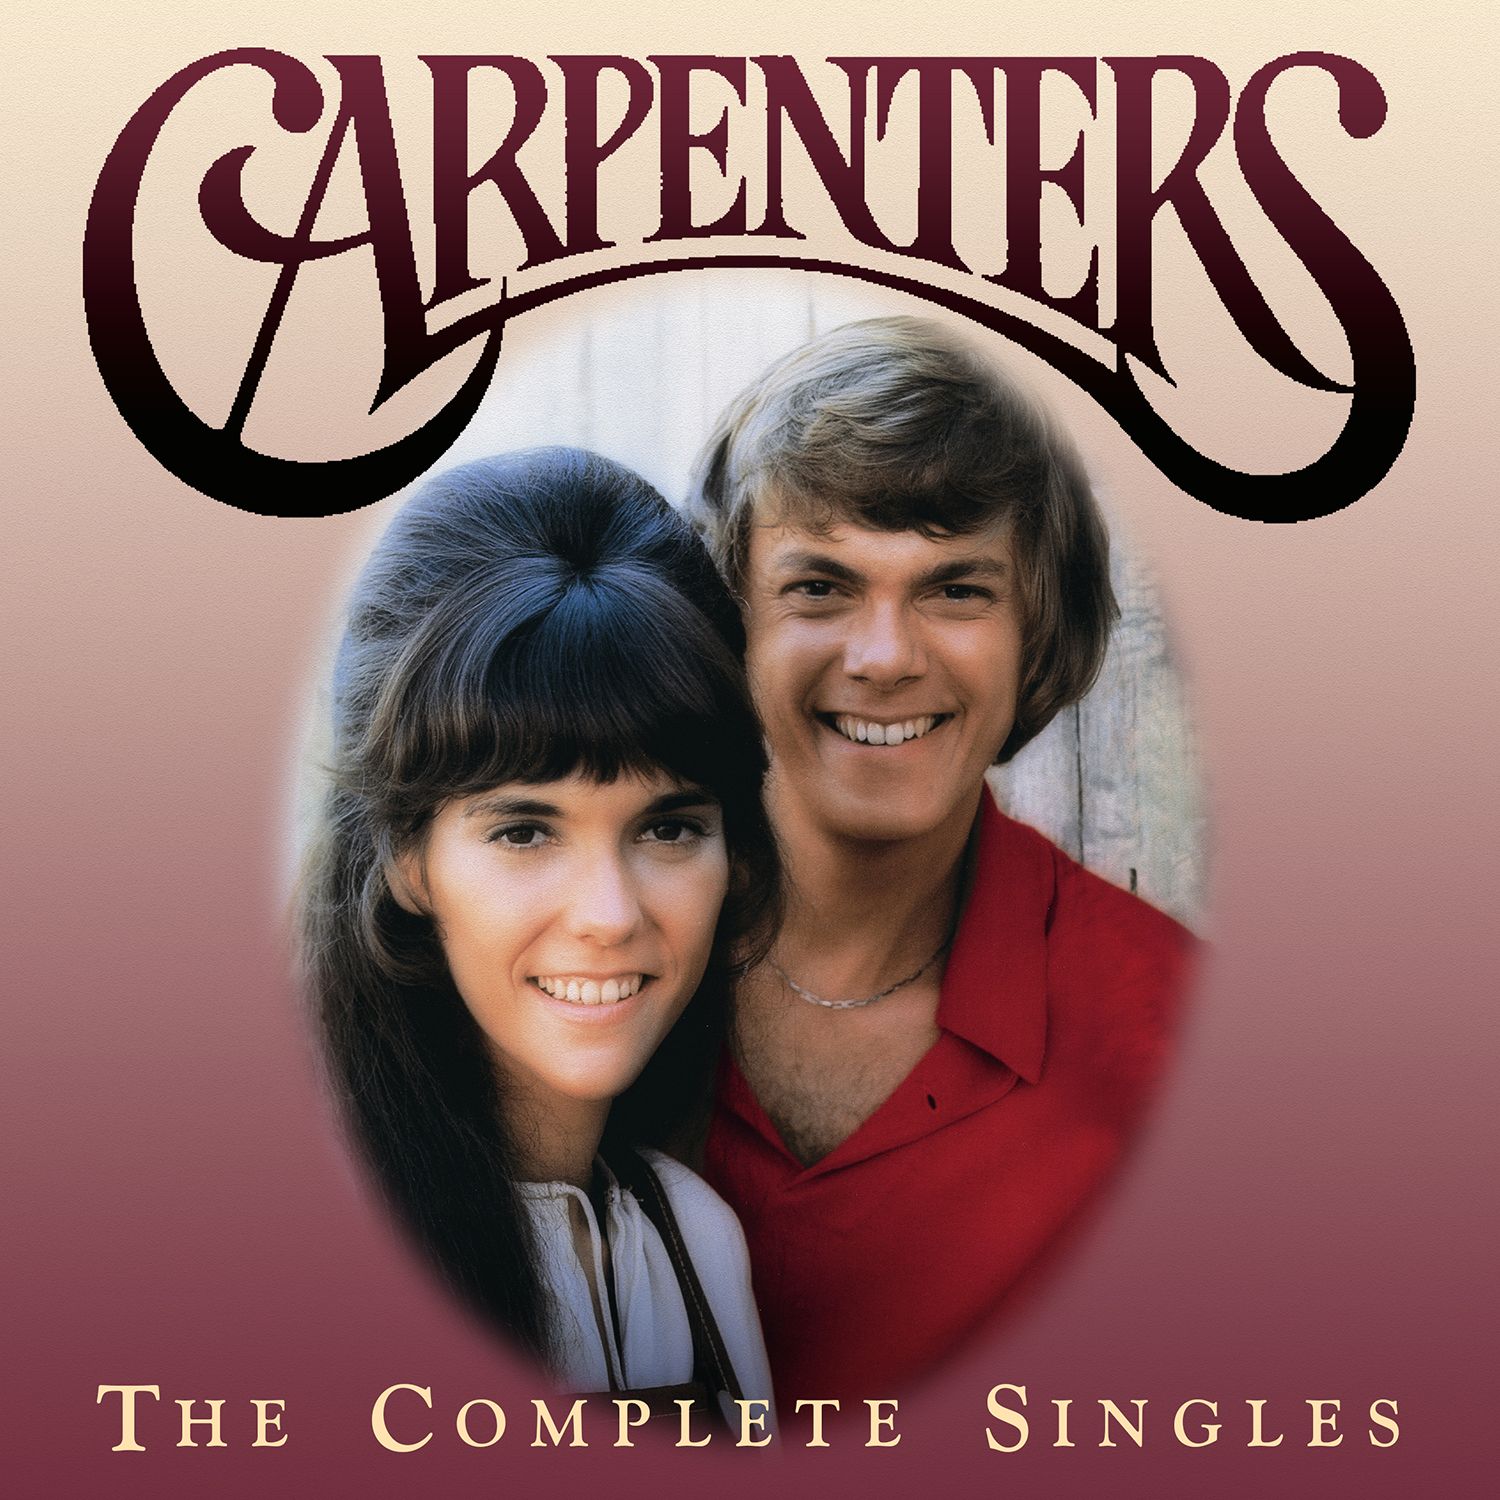 THE CARPENTERS CARPENTERS Trailers, Photo and Wallpaper